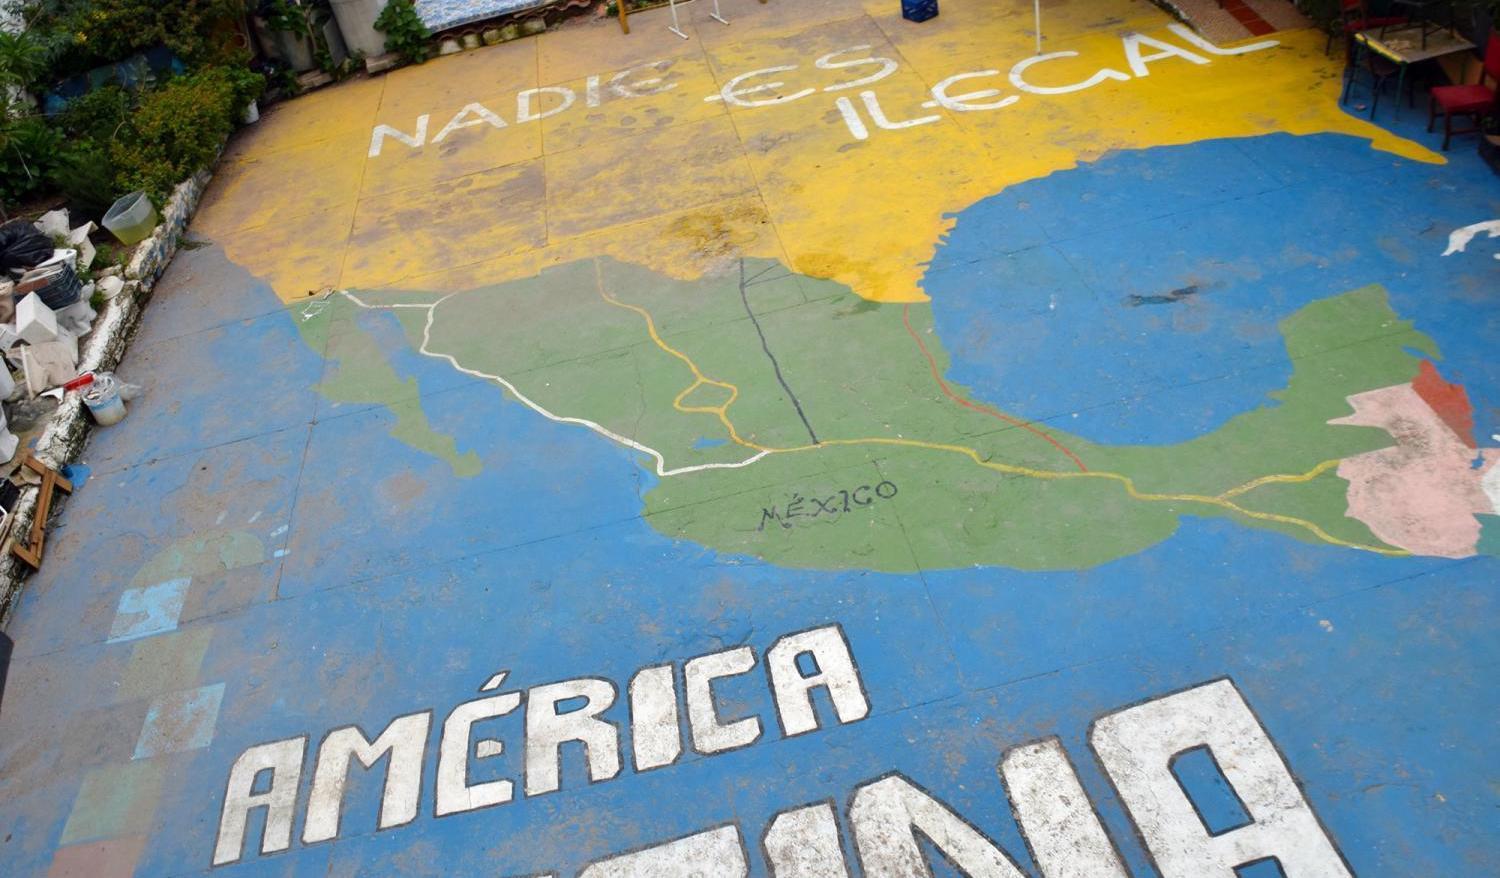 A map of North and Central America on the patio outside the El Refugio migrant shelter in Guadalajara, Mexico, says "Nobody is illegal."